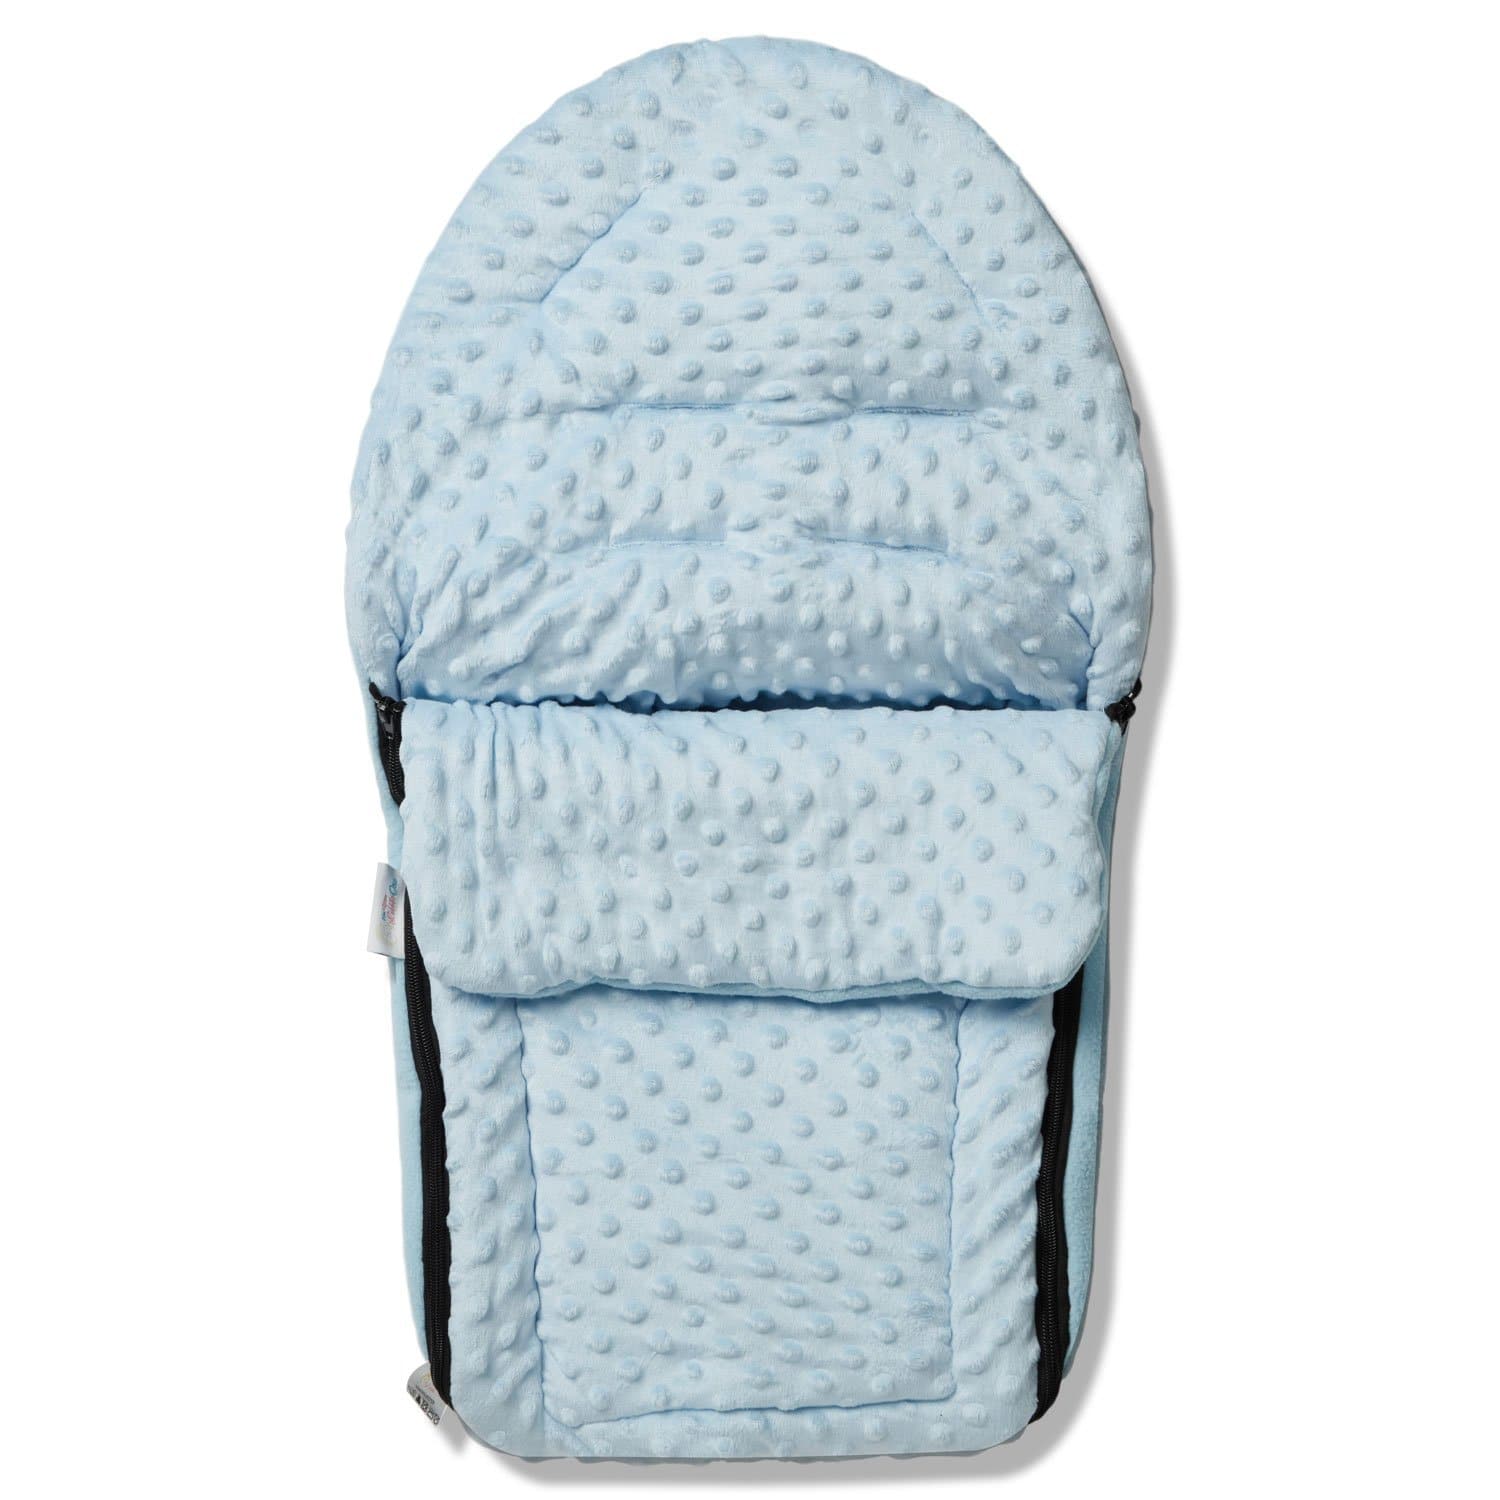 Dimple Car Seat Footmuff / Cosy Toes Compatible with Phil & Teds - Blue / Fits All Models | For Your Little One